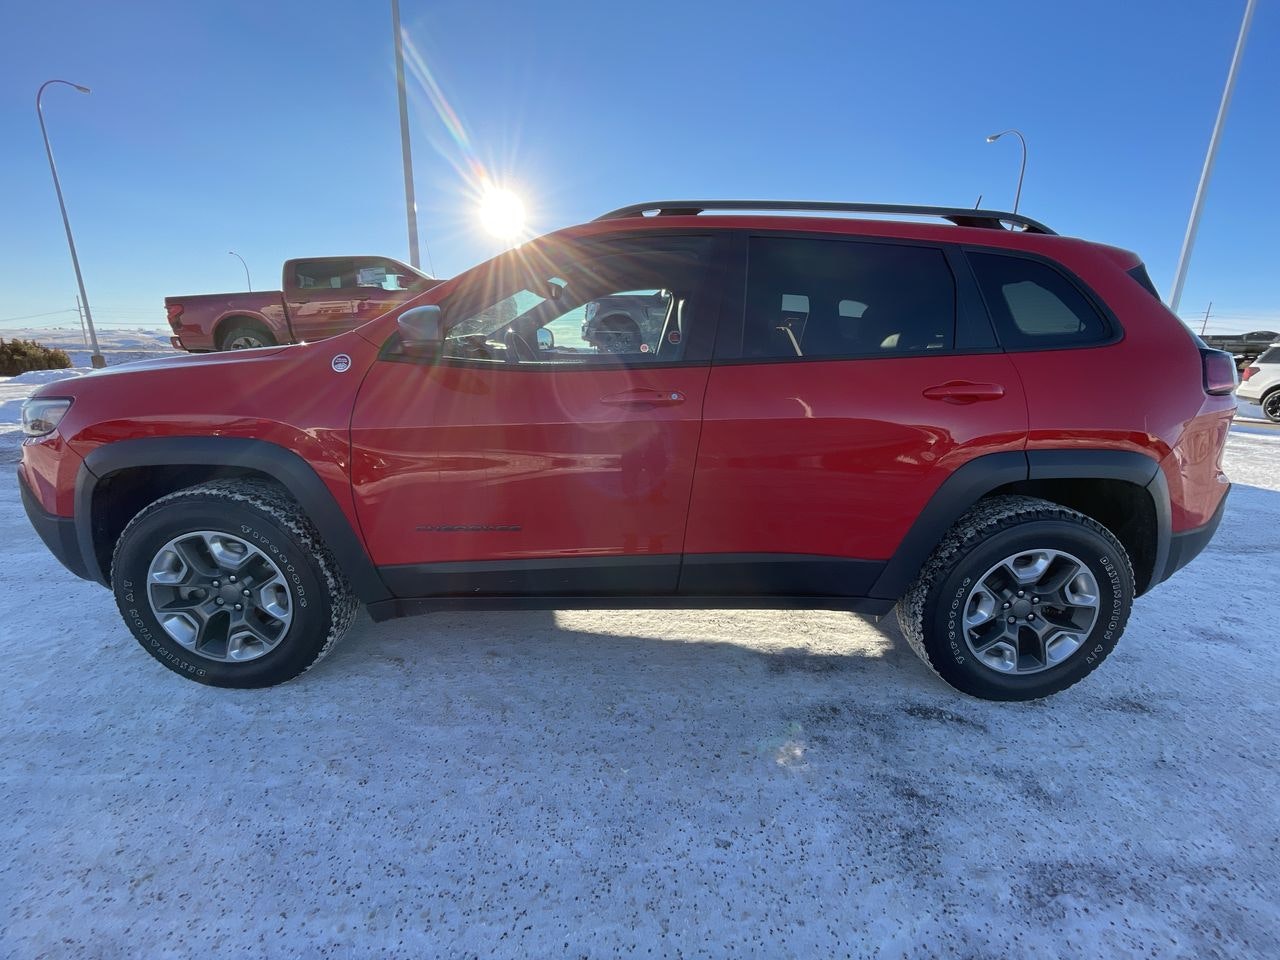 2019 Jeep Cherokee Trailhawk HEATED STEERING WHEEL NAVIGATION TOW PACKAGE (T122165A) Main Image